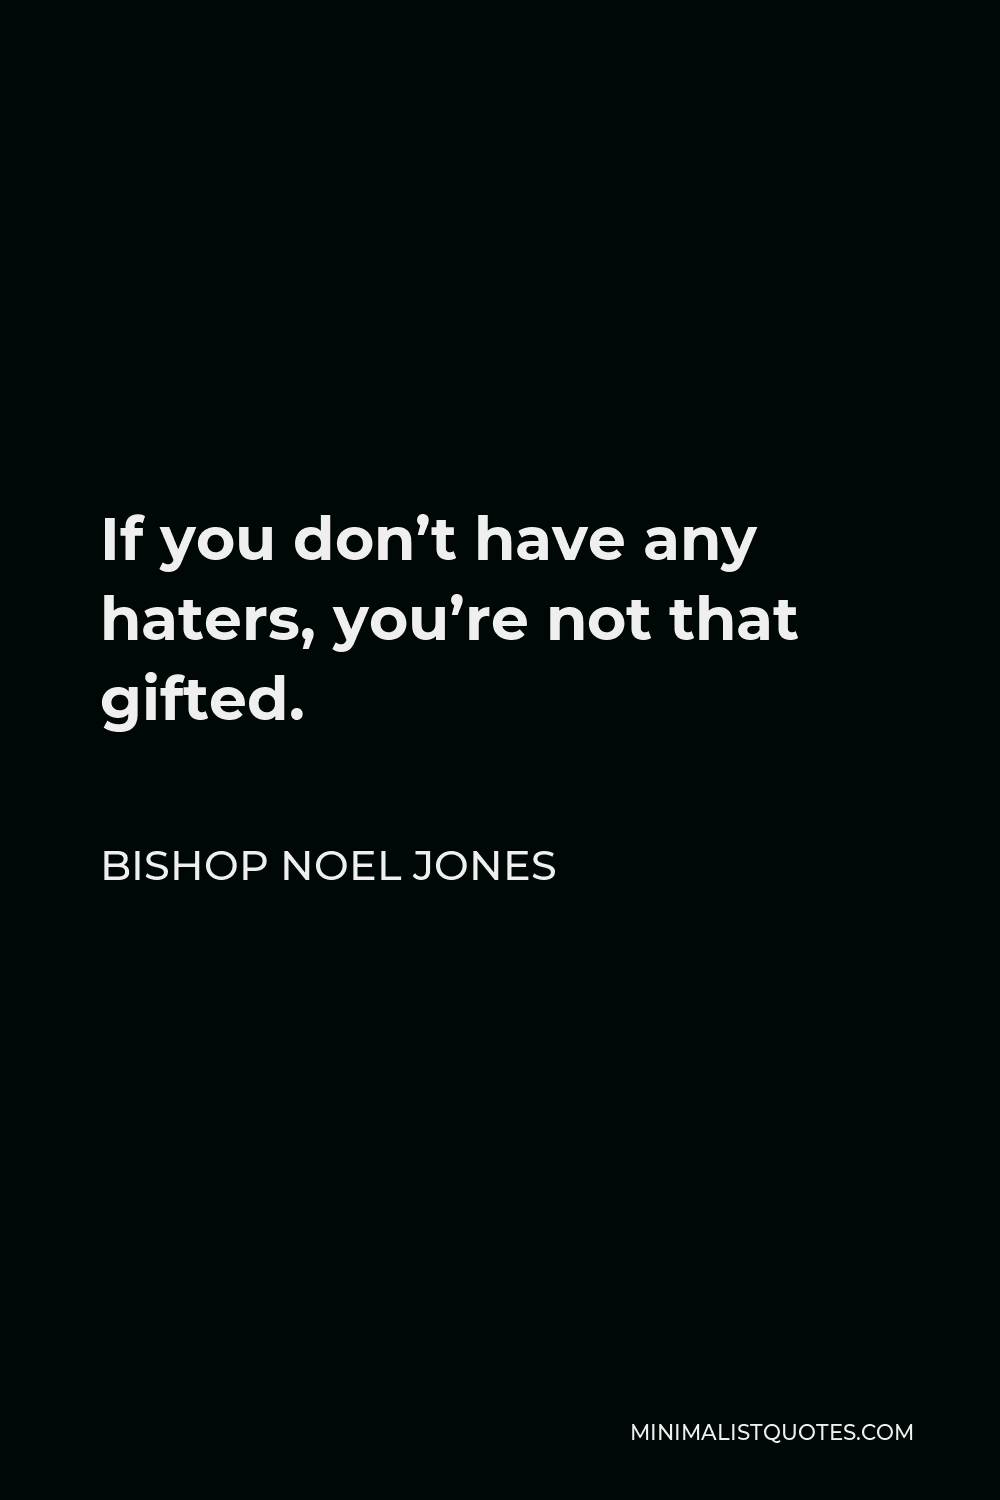 Bishop Noel Jones Quote - If you don’t have any haters, you’re not that gifted.